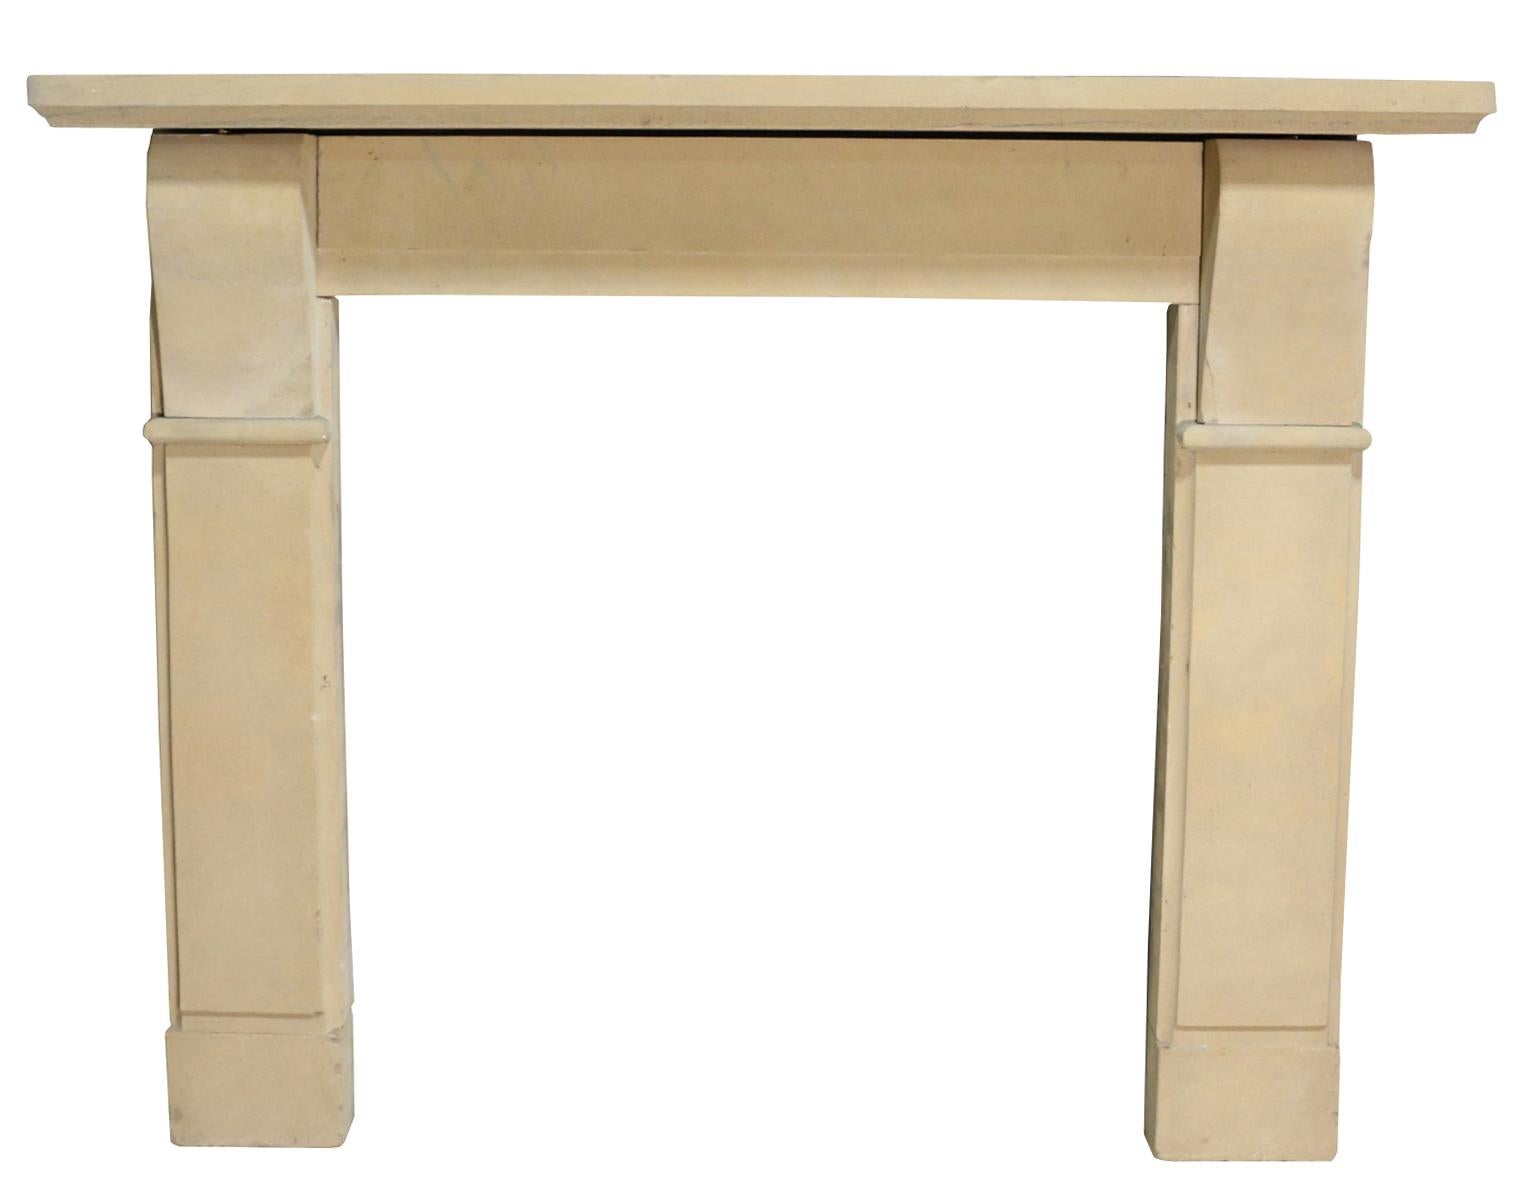 An English late Victorian period hand carved sandstone fireplace. Salvaged from a property in Derby, UK.

Opening Height 97 cm (38.18 in)
Opening Width 92 cm (36.22 in)
Width between outside of legs 133 cm (52.36 in)